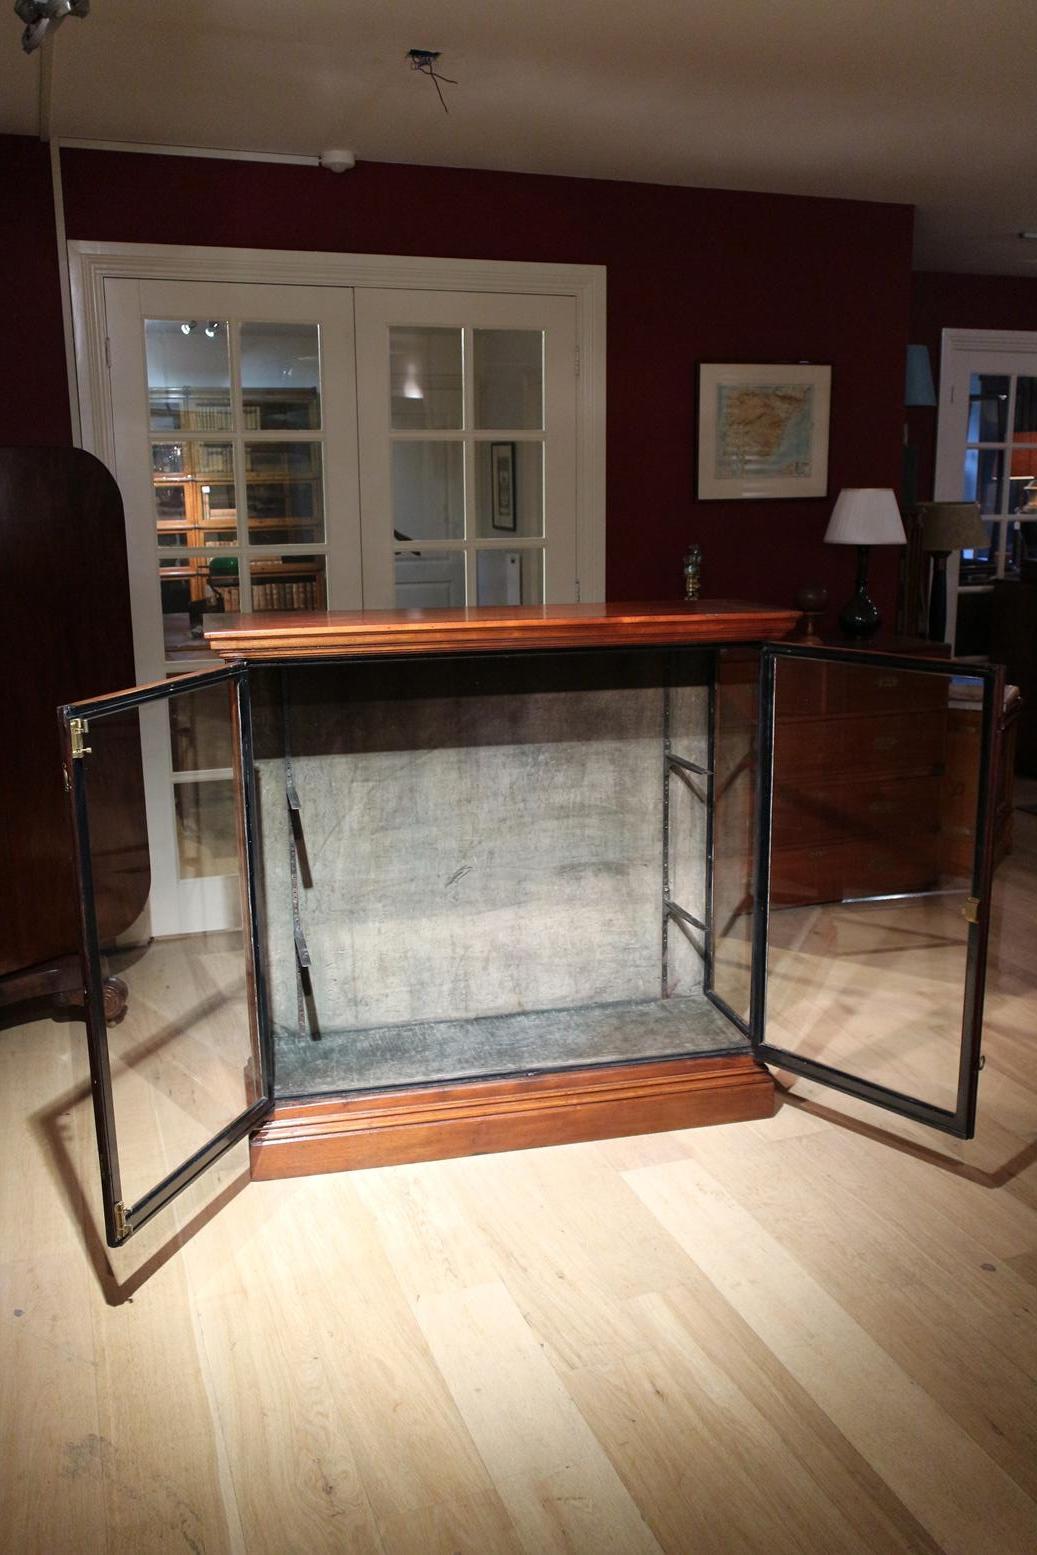 Antique 2-door mahogany display case with 2 glass shelves. Shelves are adjustable. The inside is covered with velor Fabric. Entirely in good condition.
Origin: England
Period: Approx. 1920
Size: 130cm x 37cm x H. 123cm.